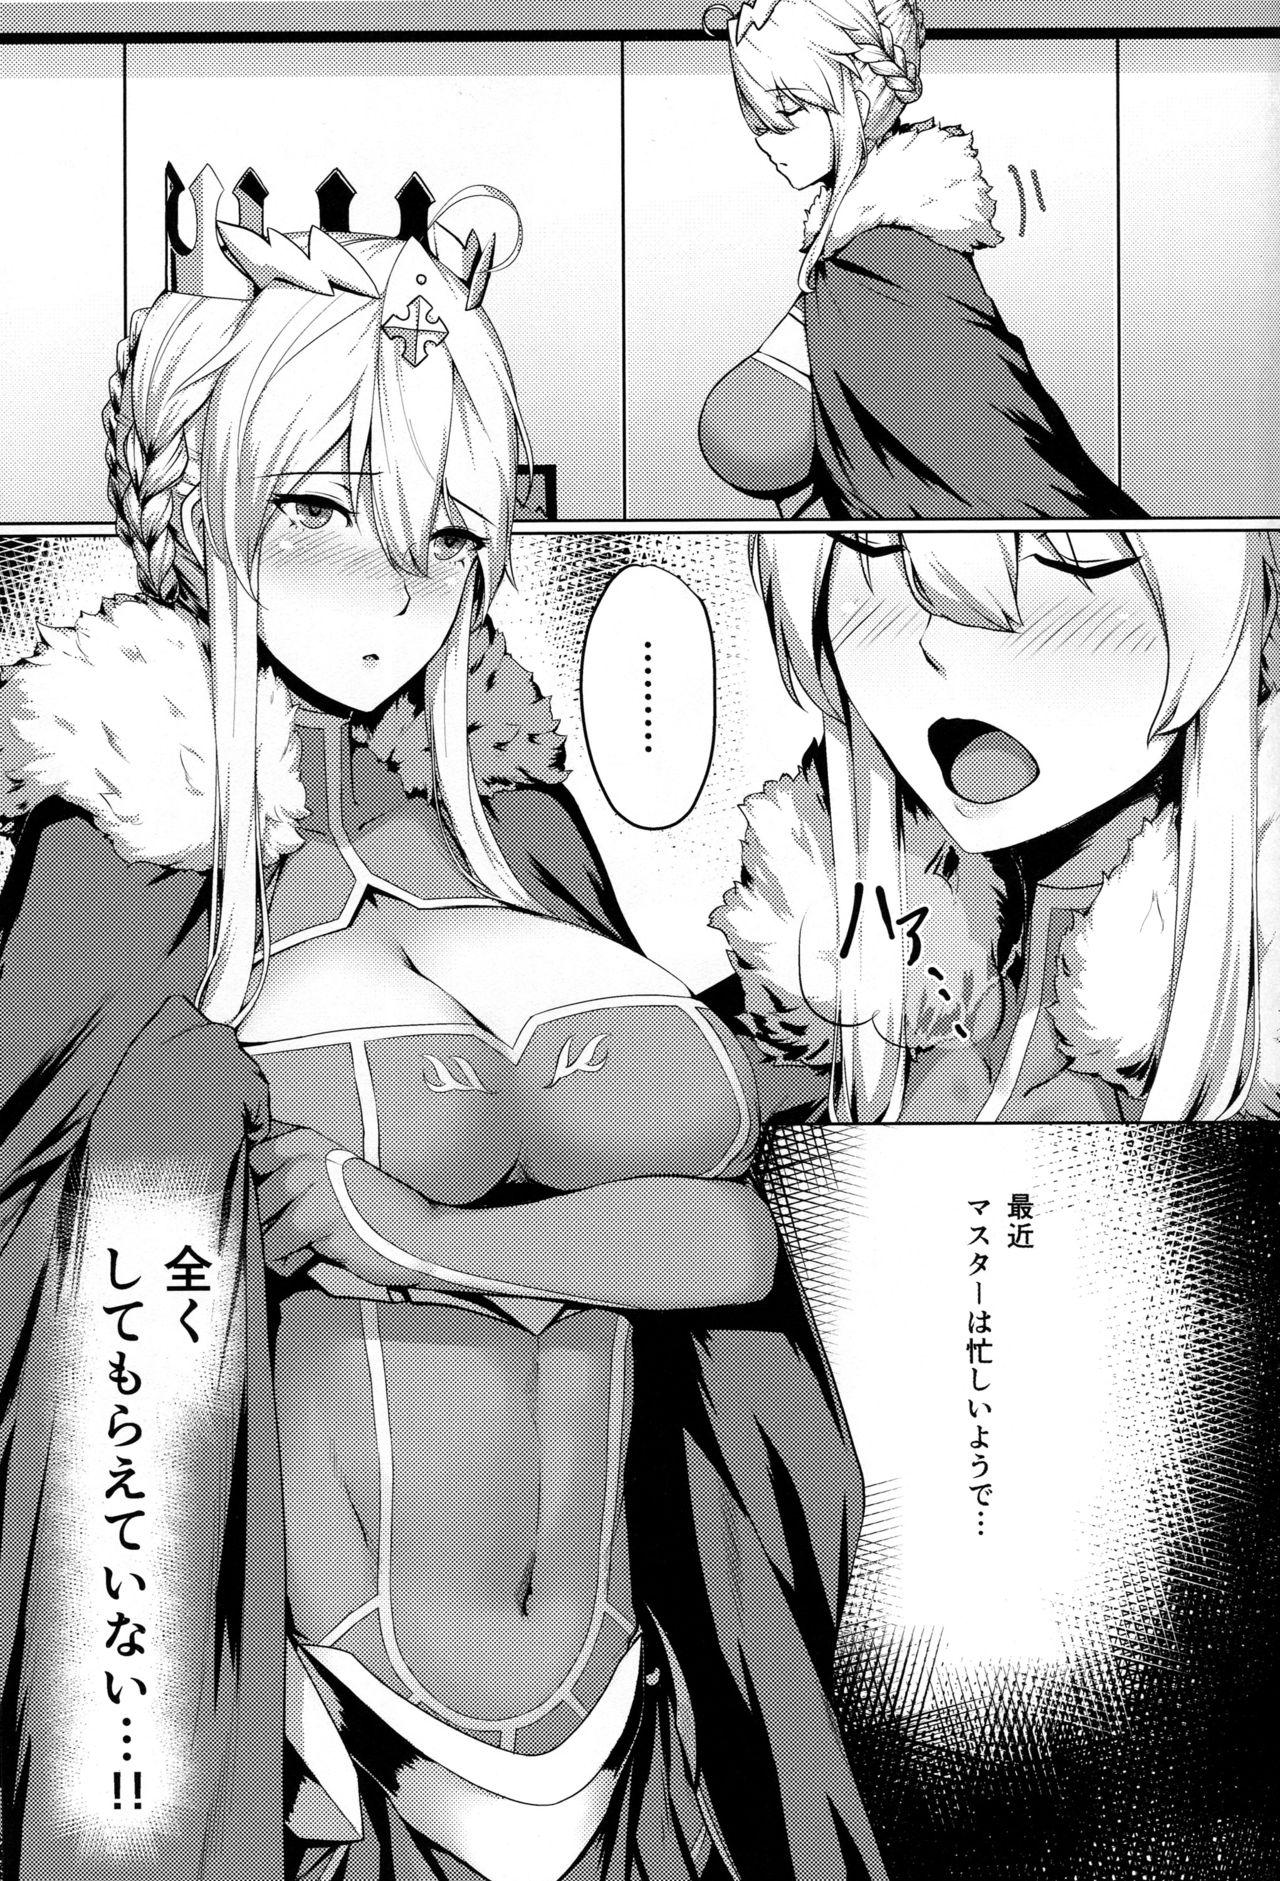 Free Amature Porn Like Attracts Like - Fate grand order Hot Girl - Page 2